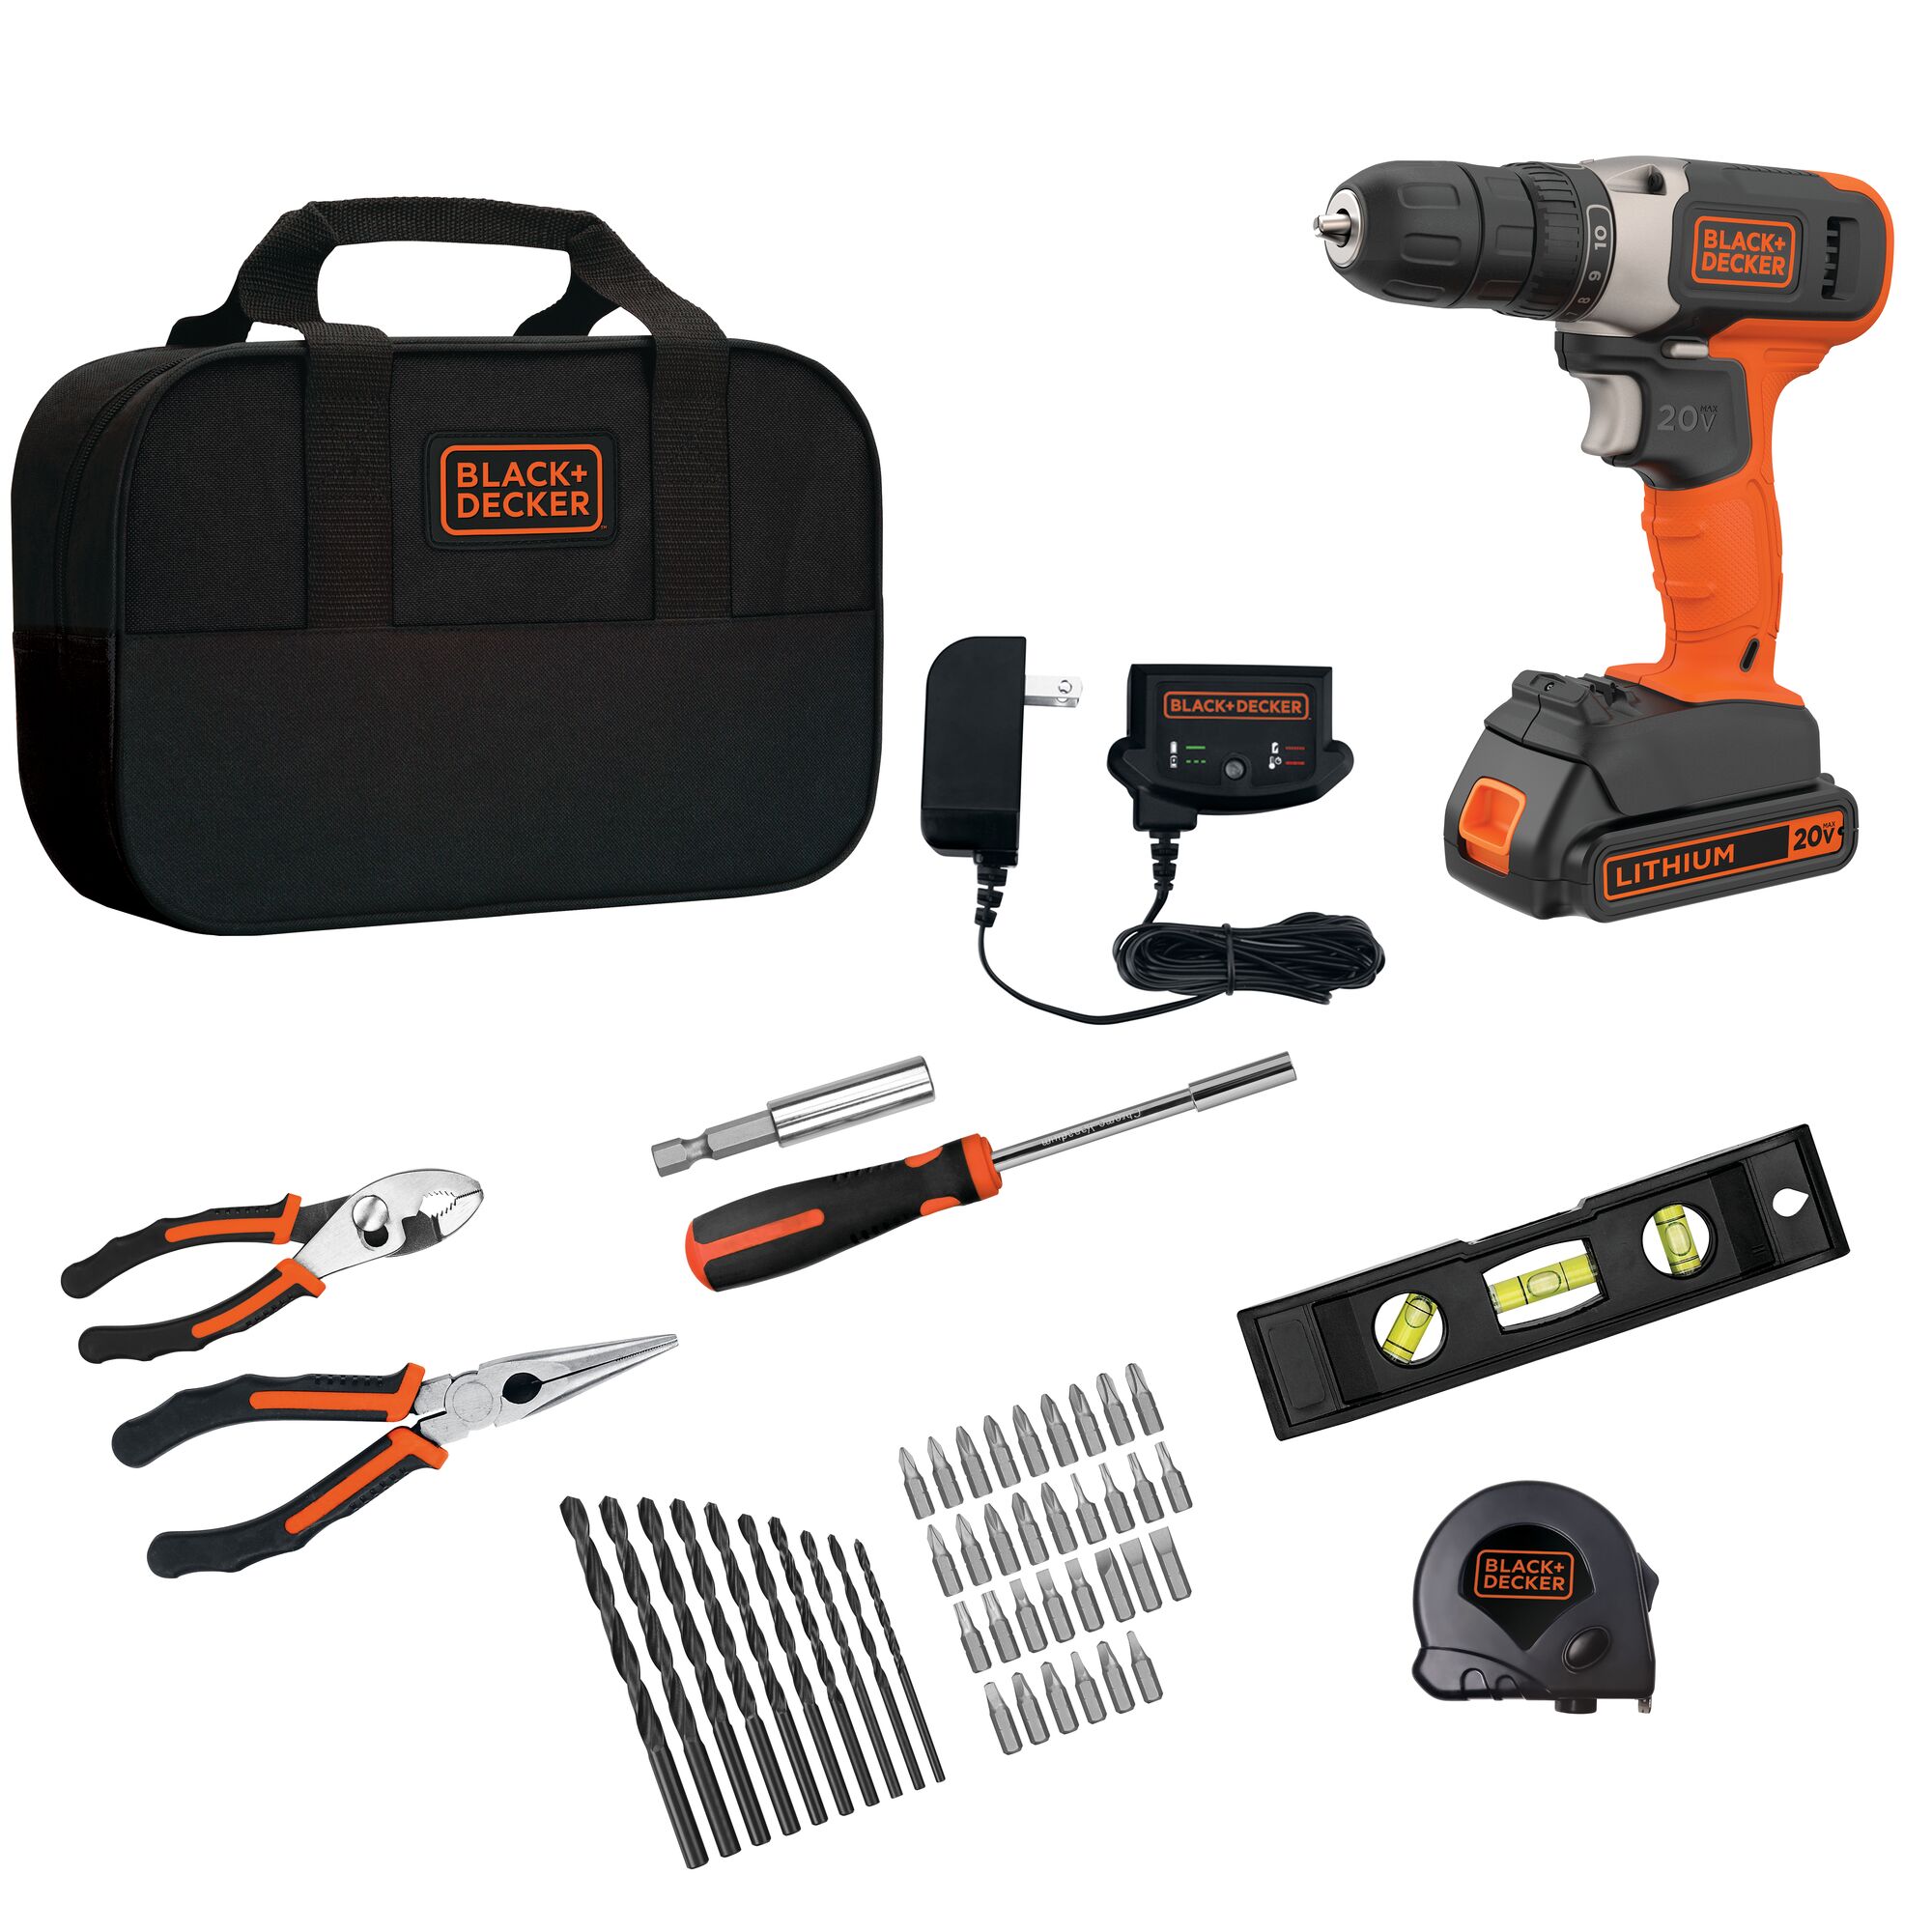 Cordless Drill with 49 Piece Home Project Kit.